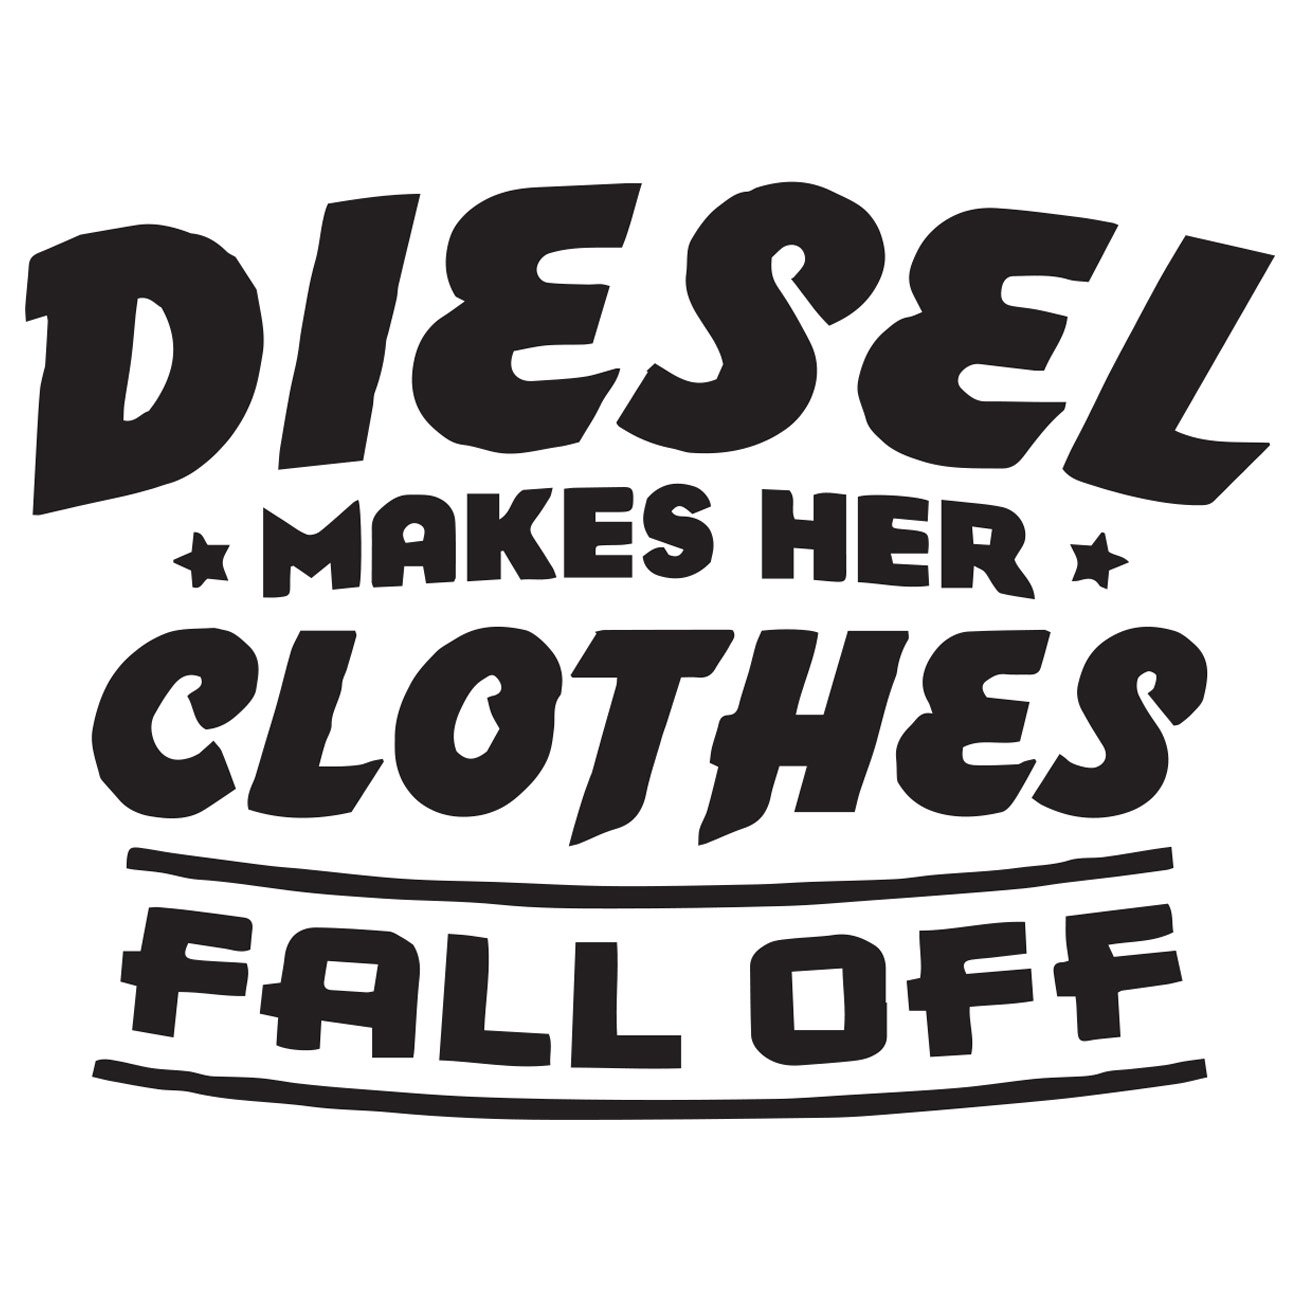 Diesel make her clothes fall off